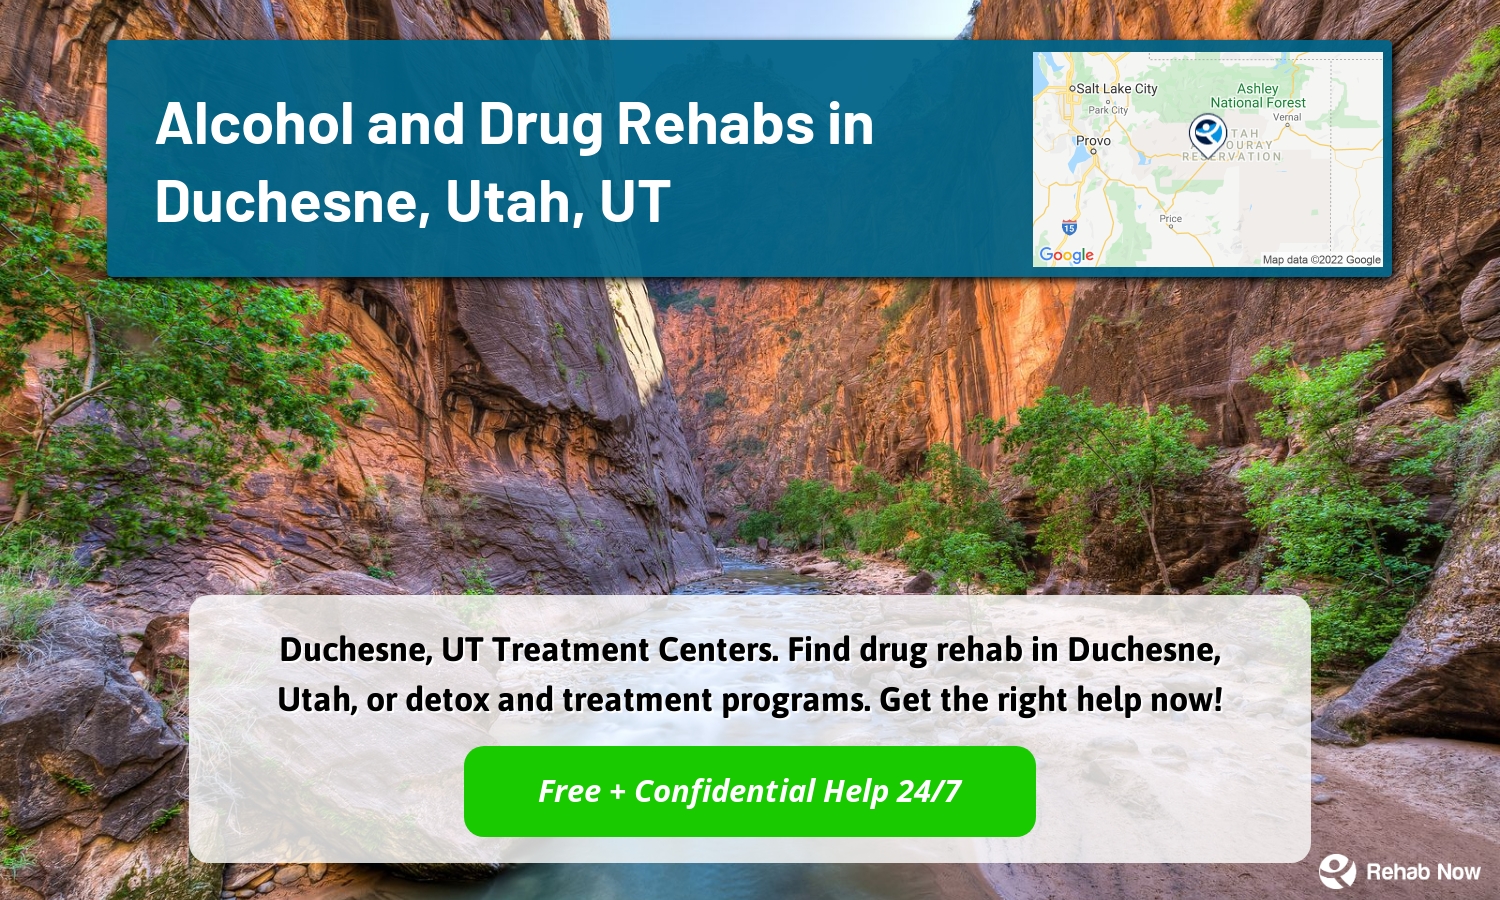 Duchesne, UT Treatment Centers. Find drug rehab in Duchesne, Utah, or detox and treatment programs. Get the right help now!